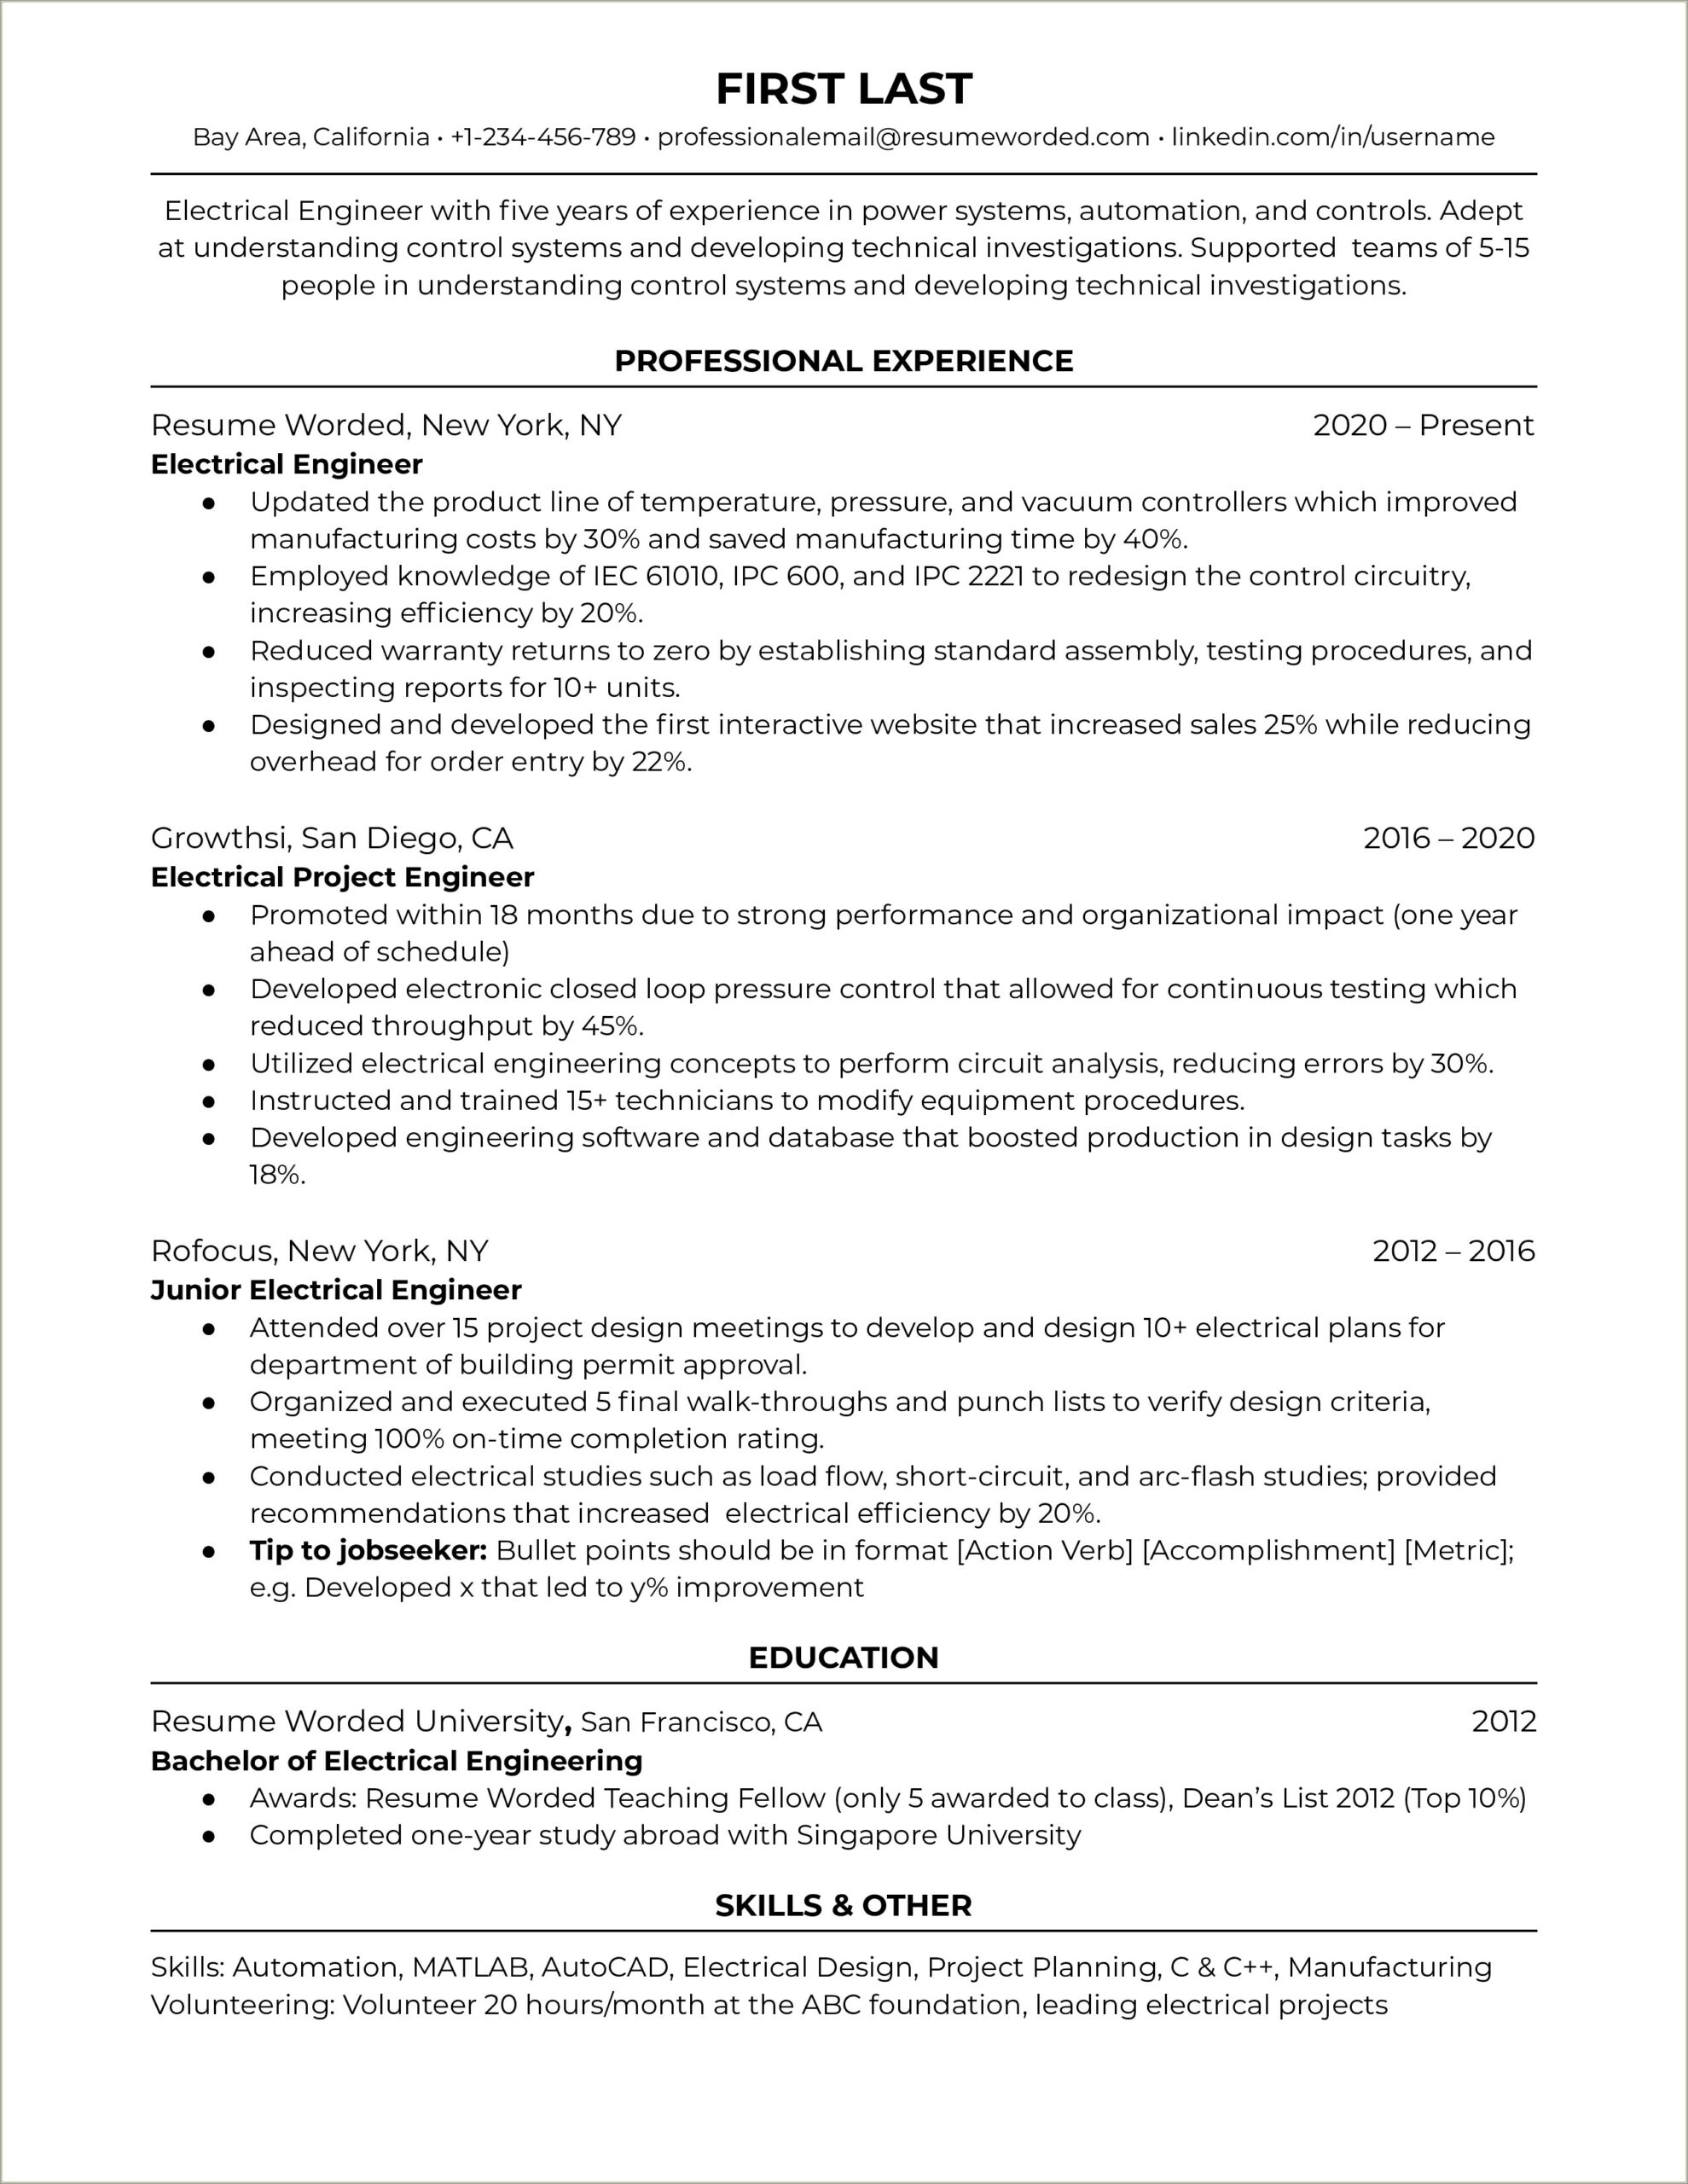 Resume For 1 Year Experience Engineer